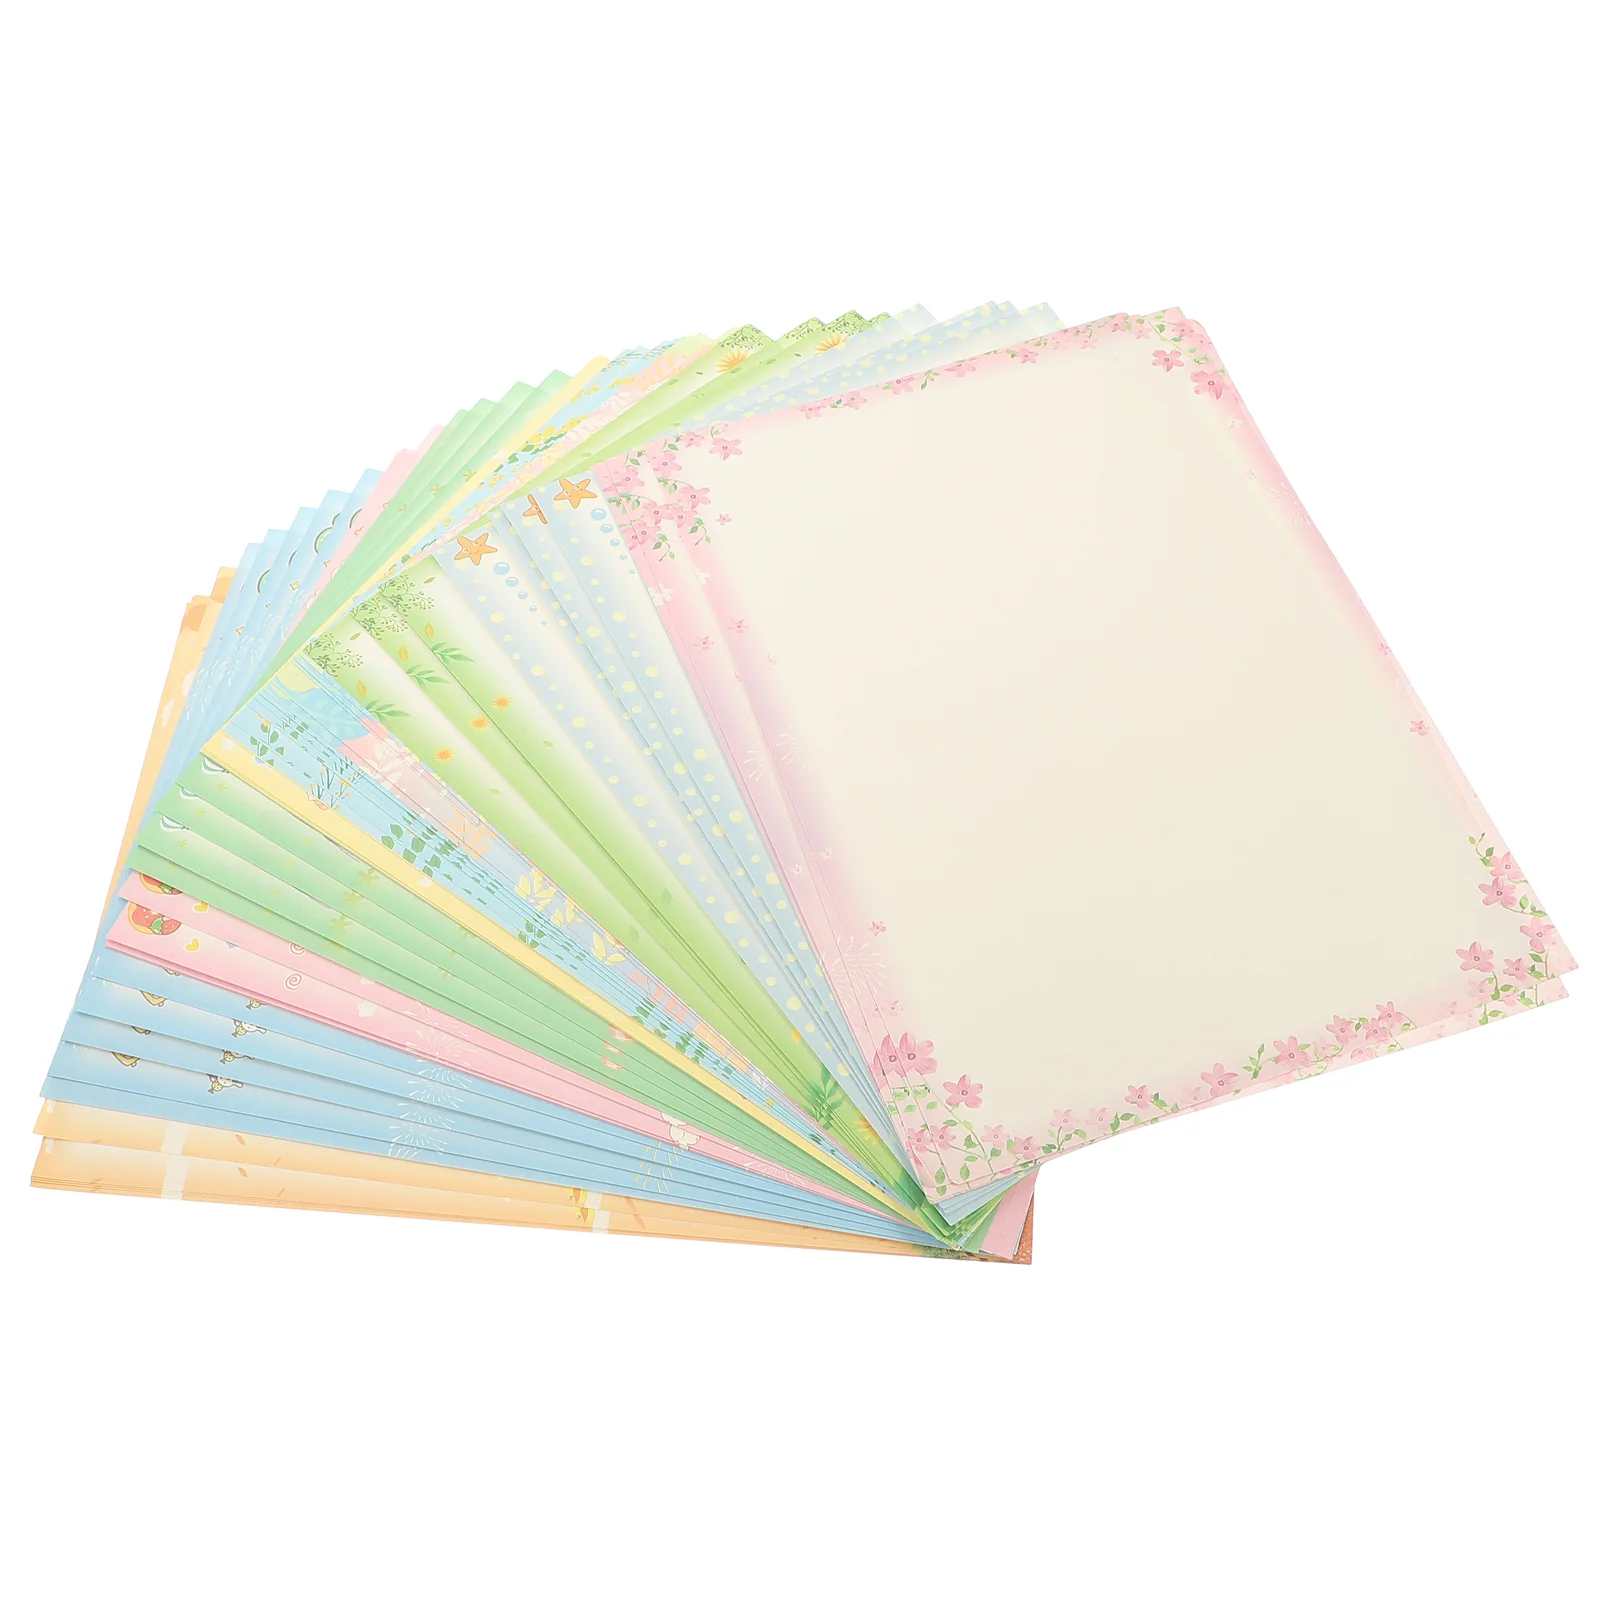 

50 Sheets A4 Lace Computer Paper Color Copy Painting Printing 1 Pack (50pcs) Folding Printer Delicate Decorative Supply